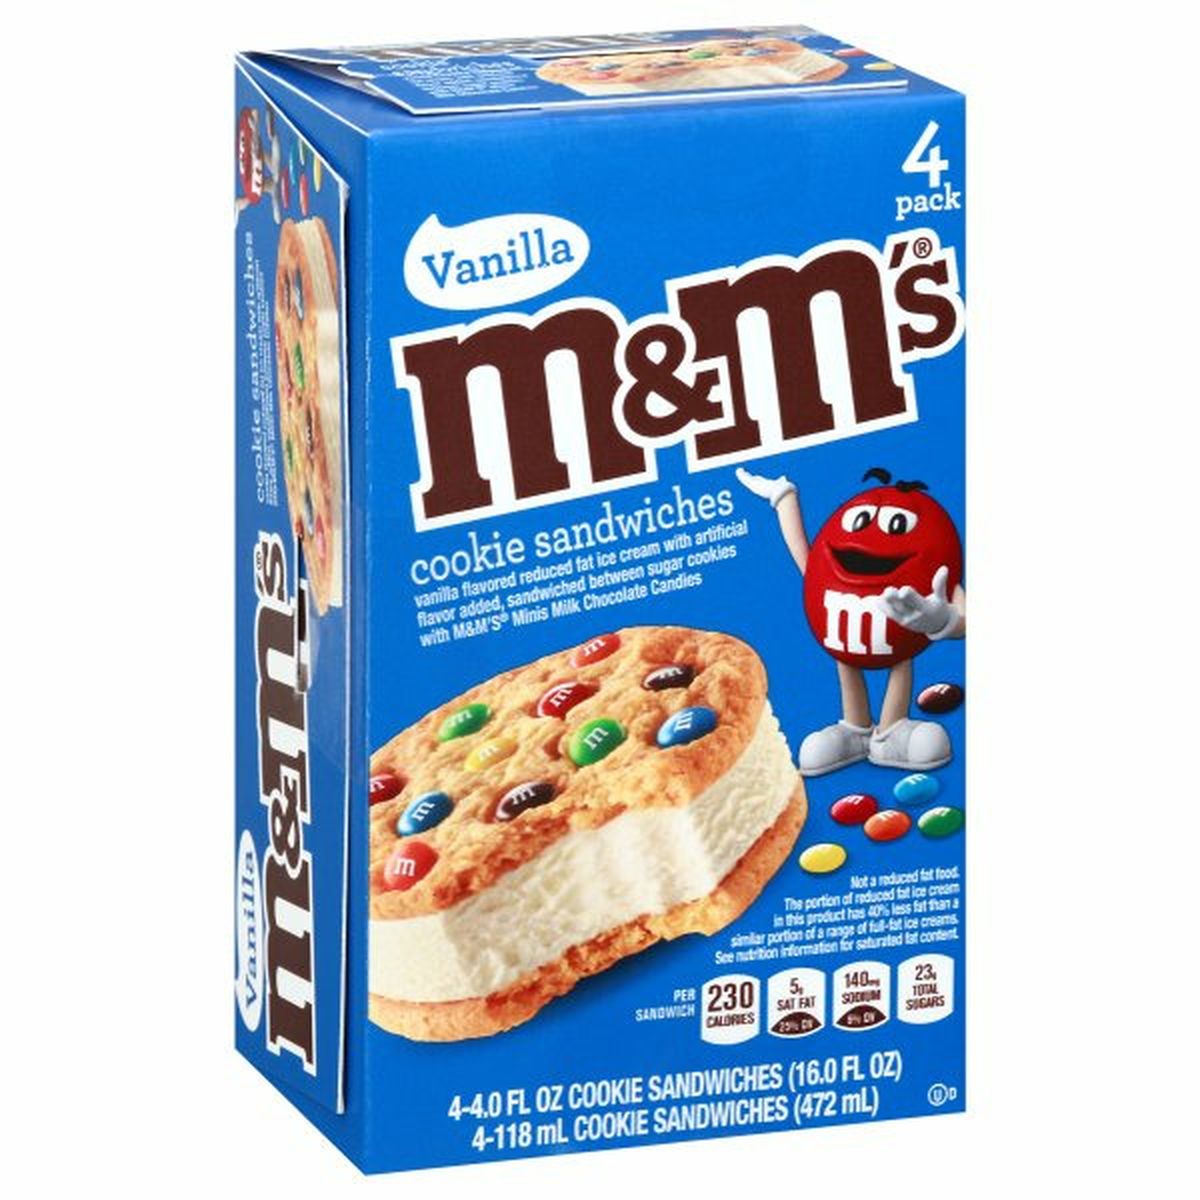 Calories in M&M's Cookie Sandwiches, Vanilla, 4 Pack